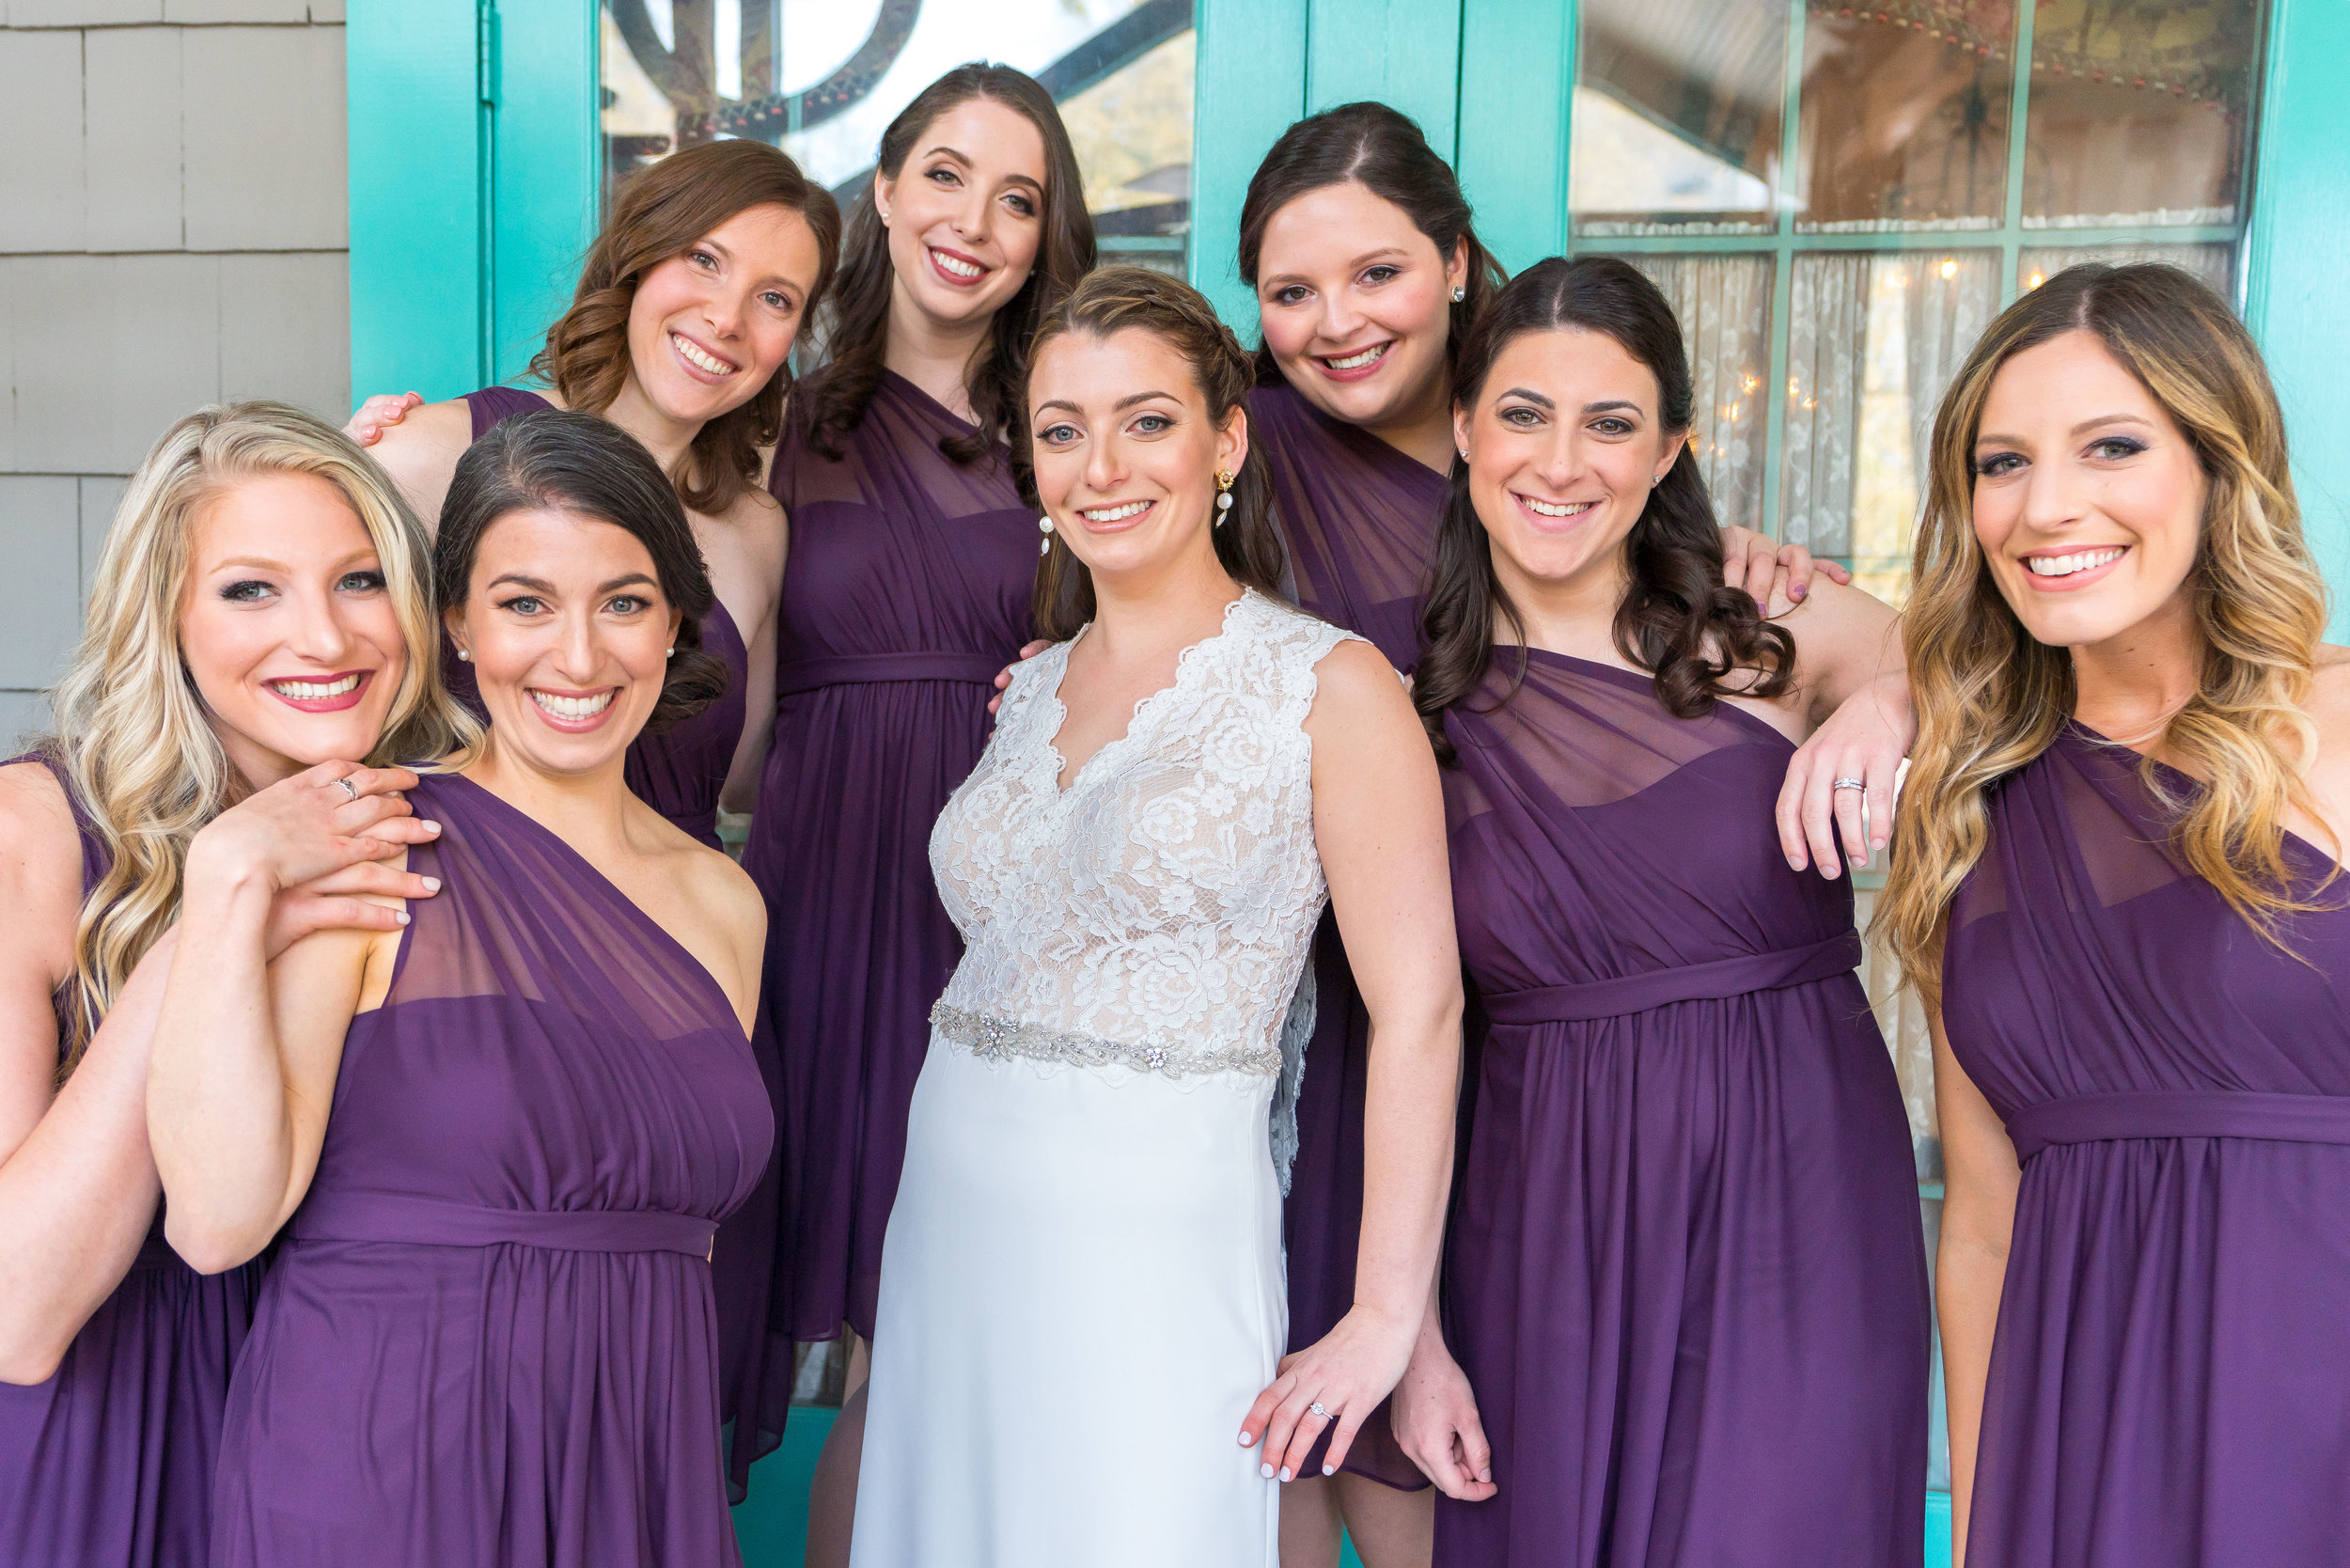 The bride and all her bridesmaids at La Ferme wedding in Chevy Chase